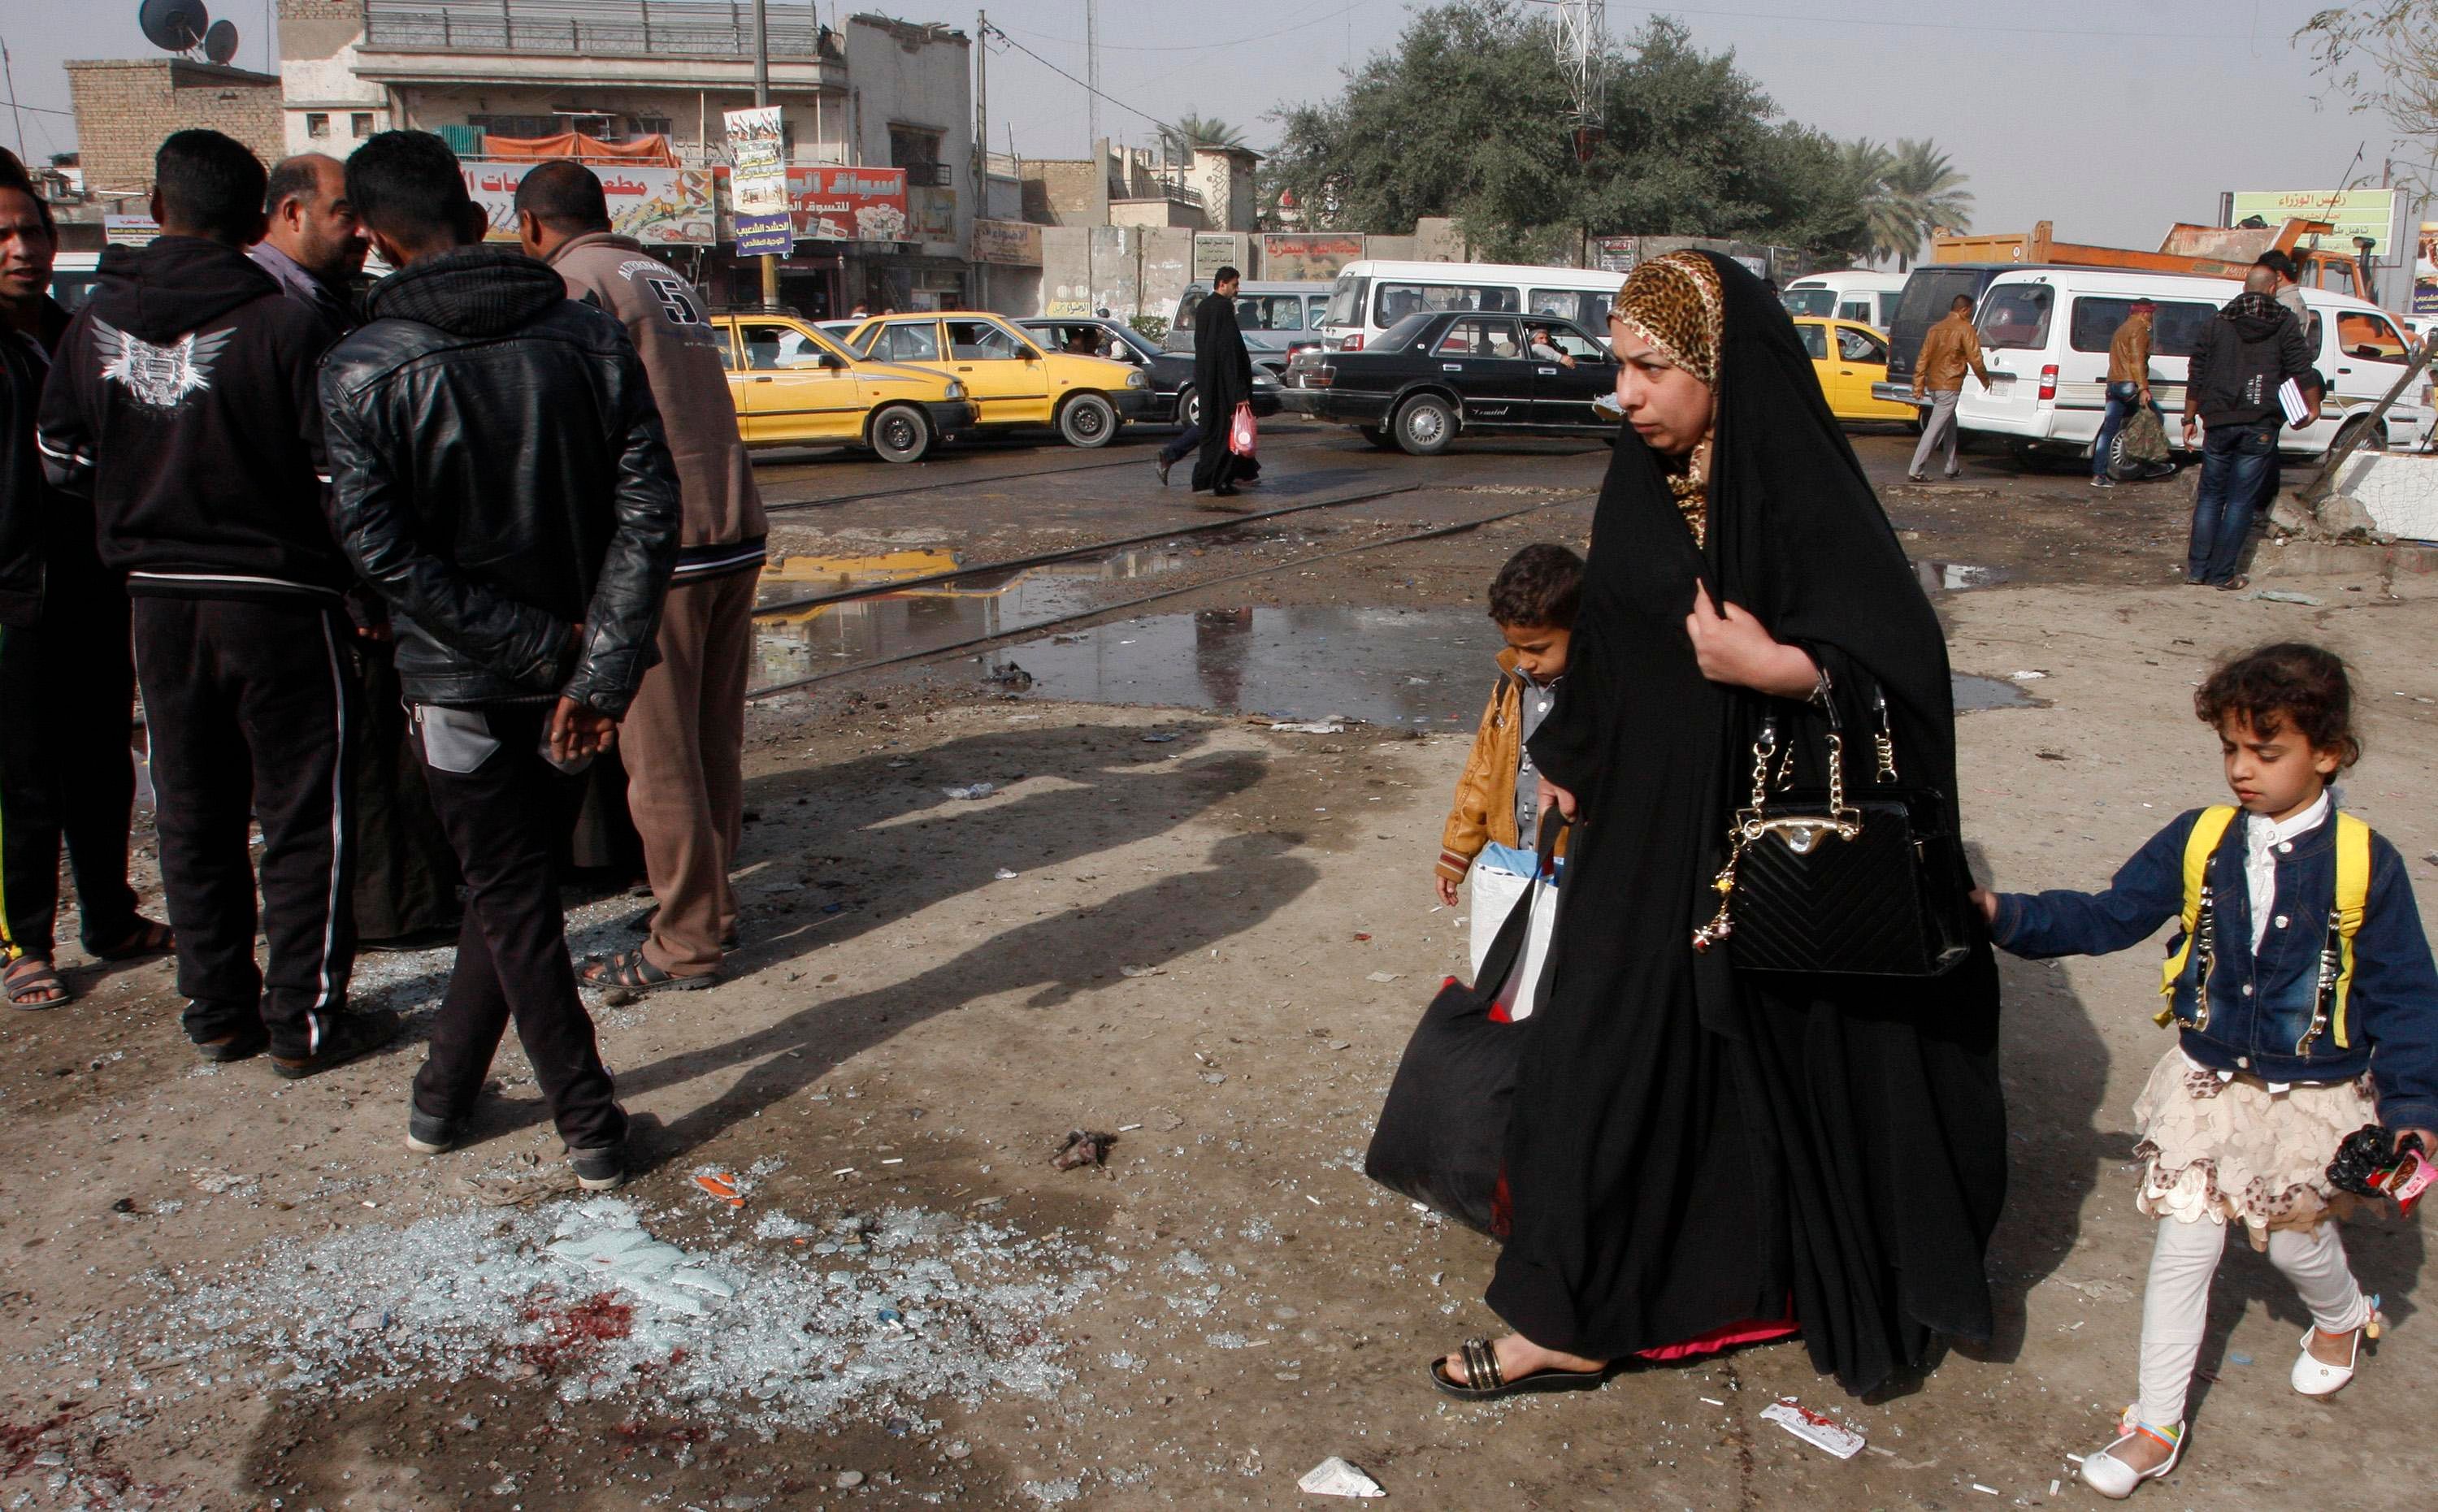 A woman with her children walks past at the site of a suicide bombing attack in the Shi'ite neighborhood of Kadhimiya in Baghdad February 9, 2015. Photo: Reuters